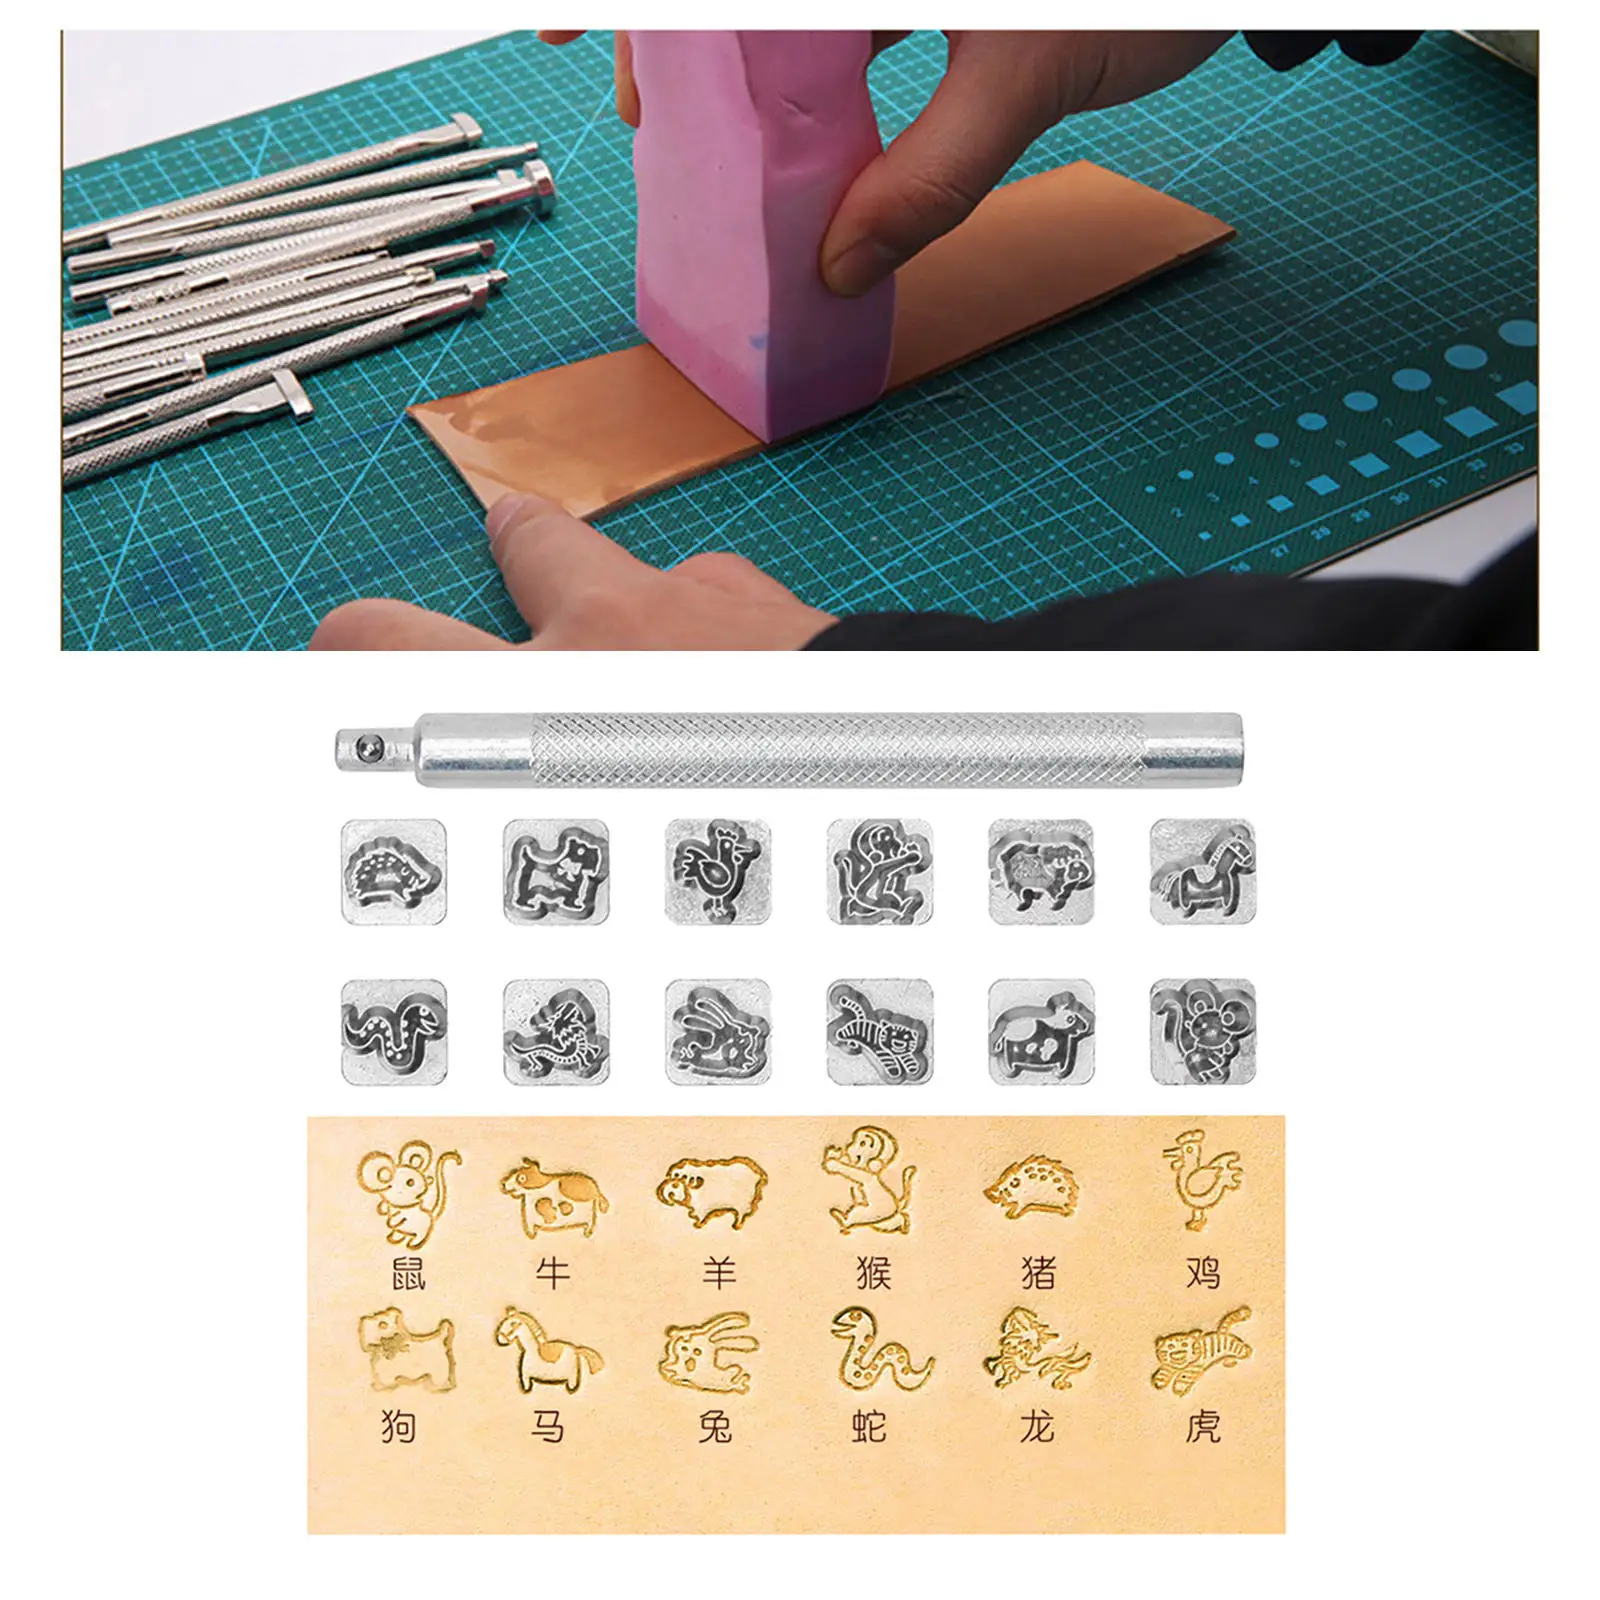 12 Styles Leather Craft Stamps Set Leathercraft Working Saddle Making Tools Carving Solid DIY Printing Clouds Stamping